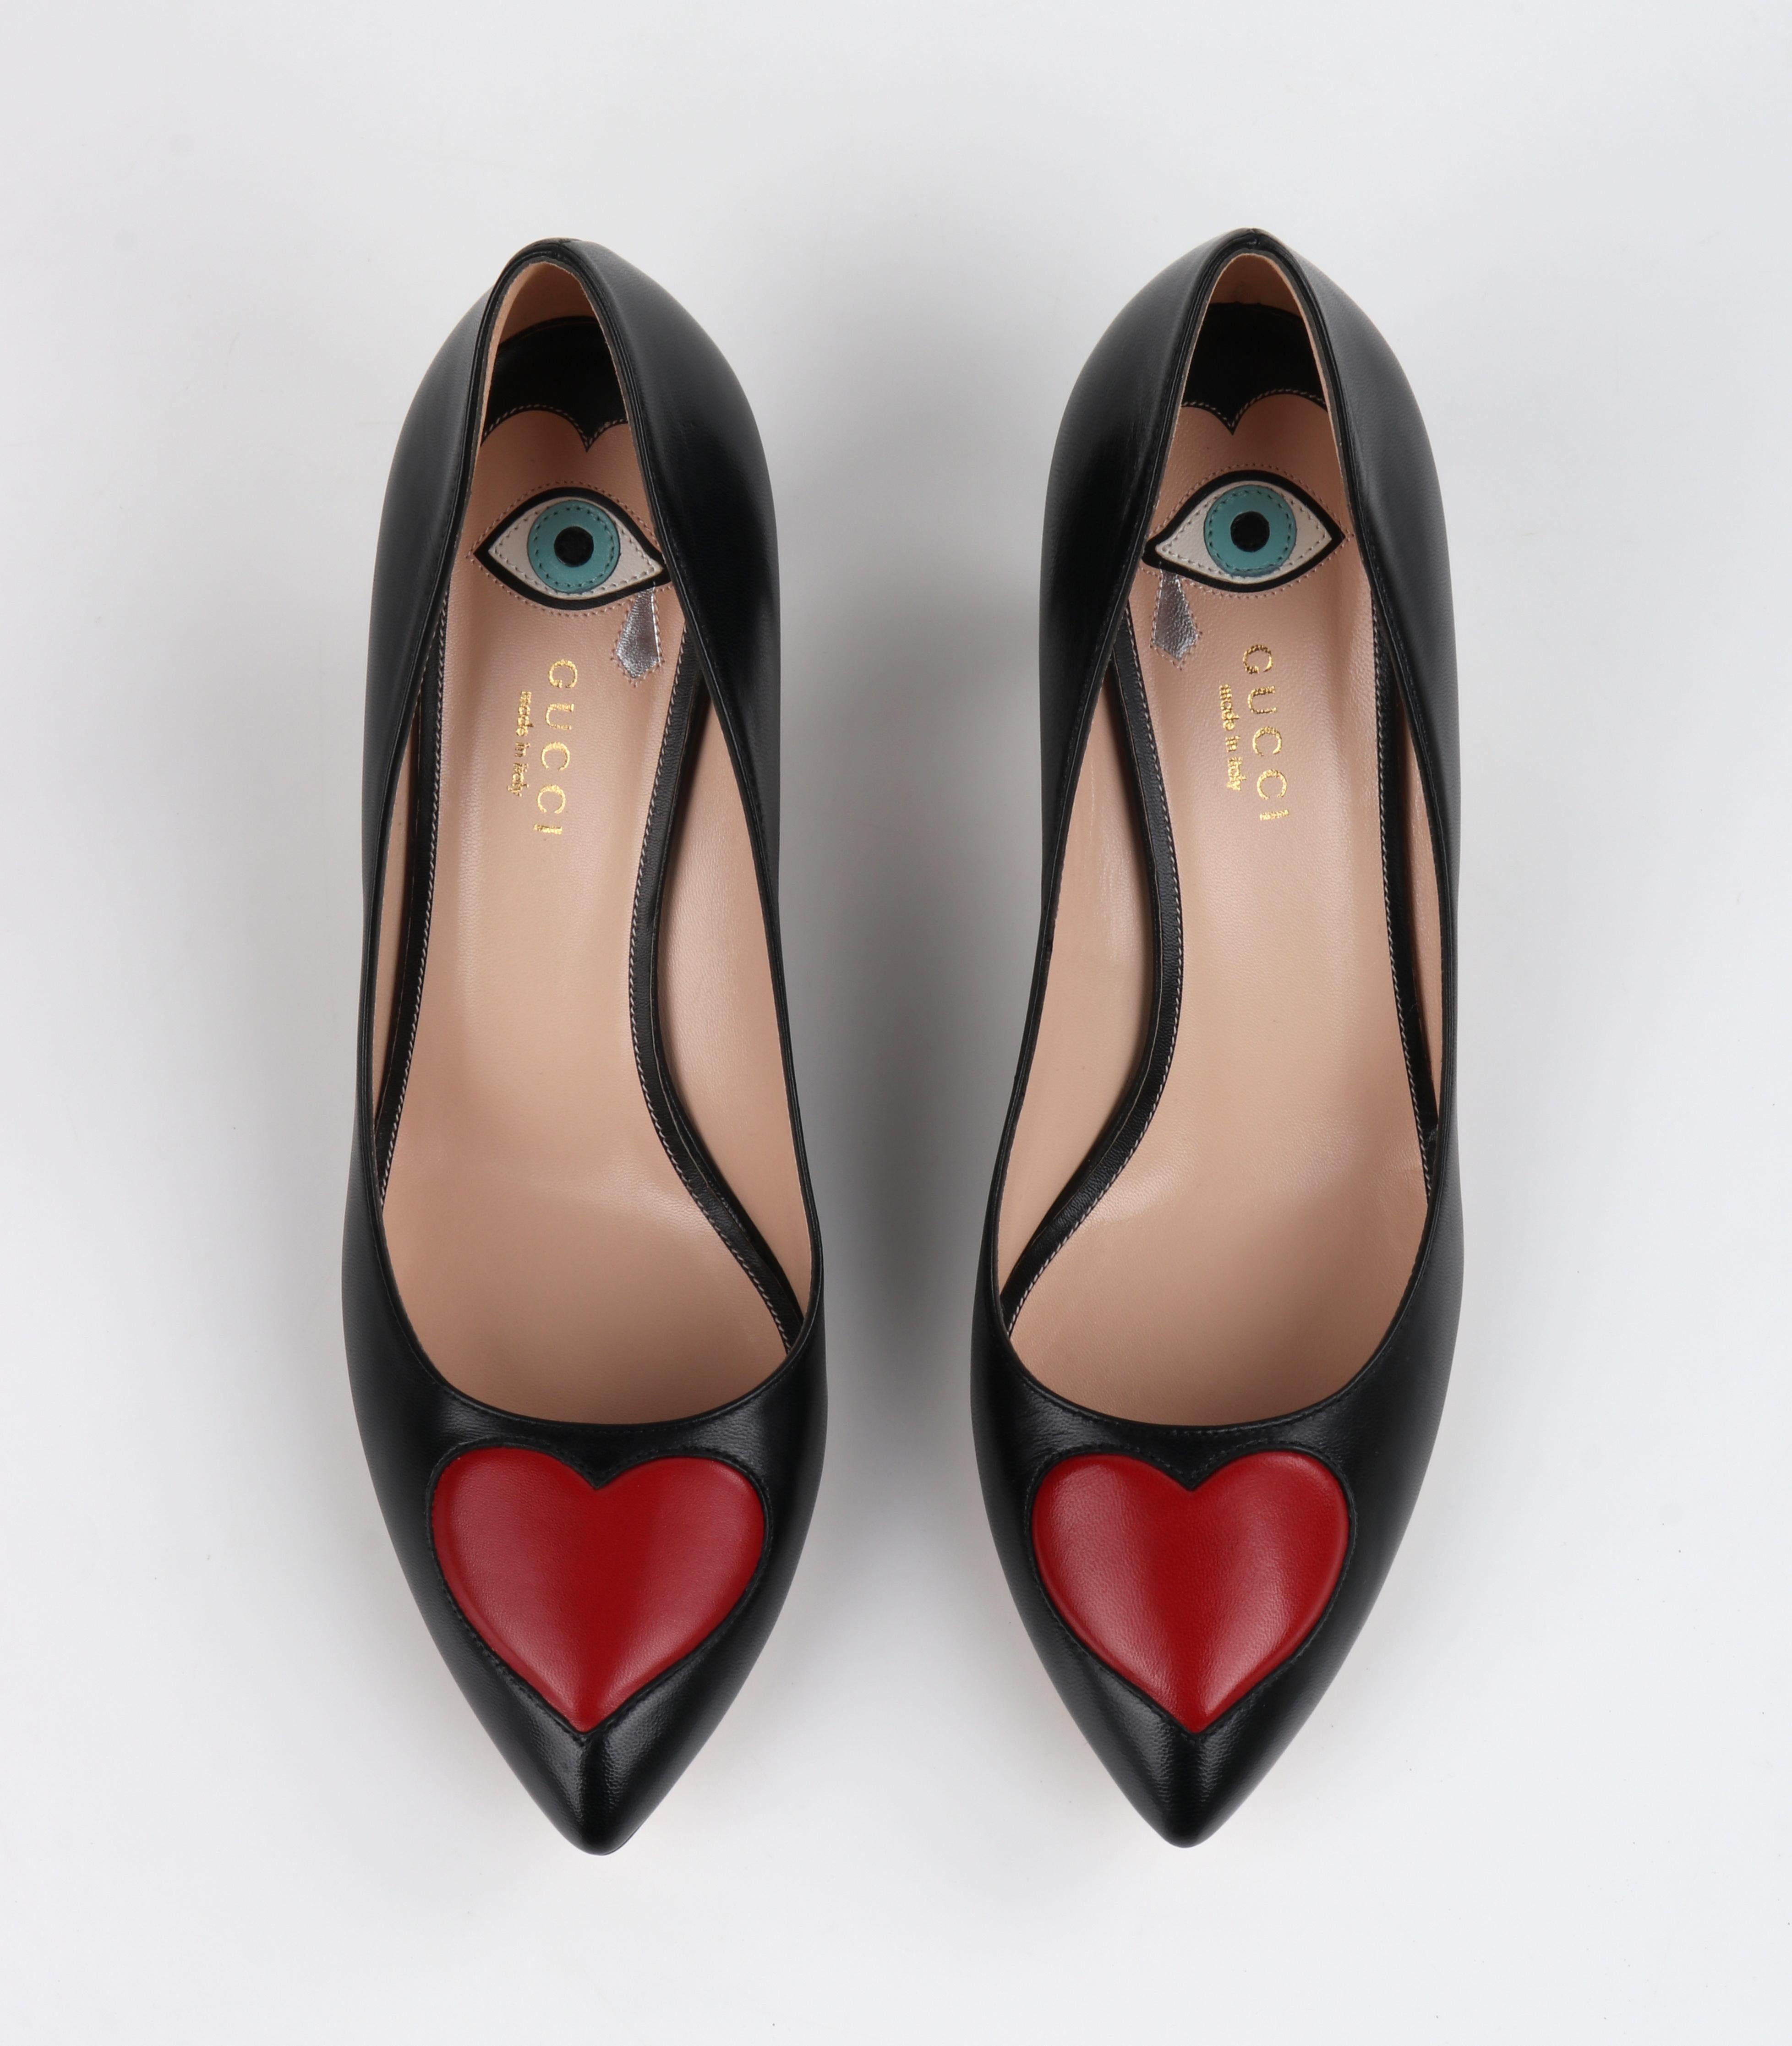 GUCCI Pre-Fall 2016 Black Red Leather Heart Pointed Toe Kitten Heel Pumps NIB 5